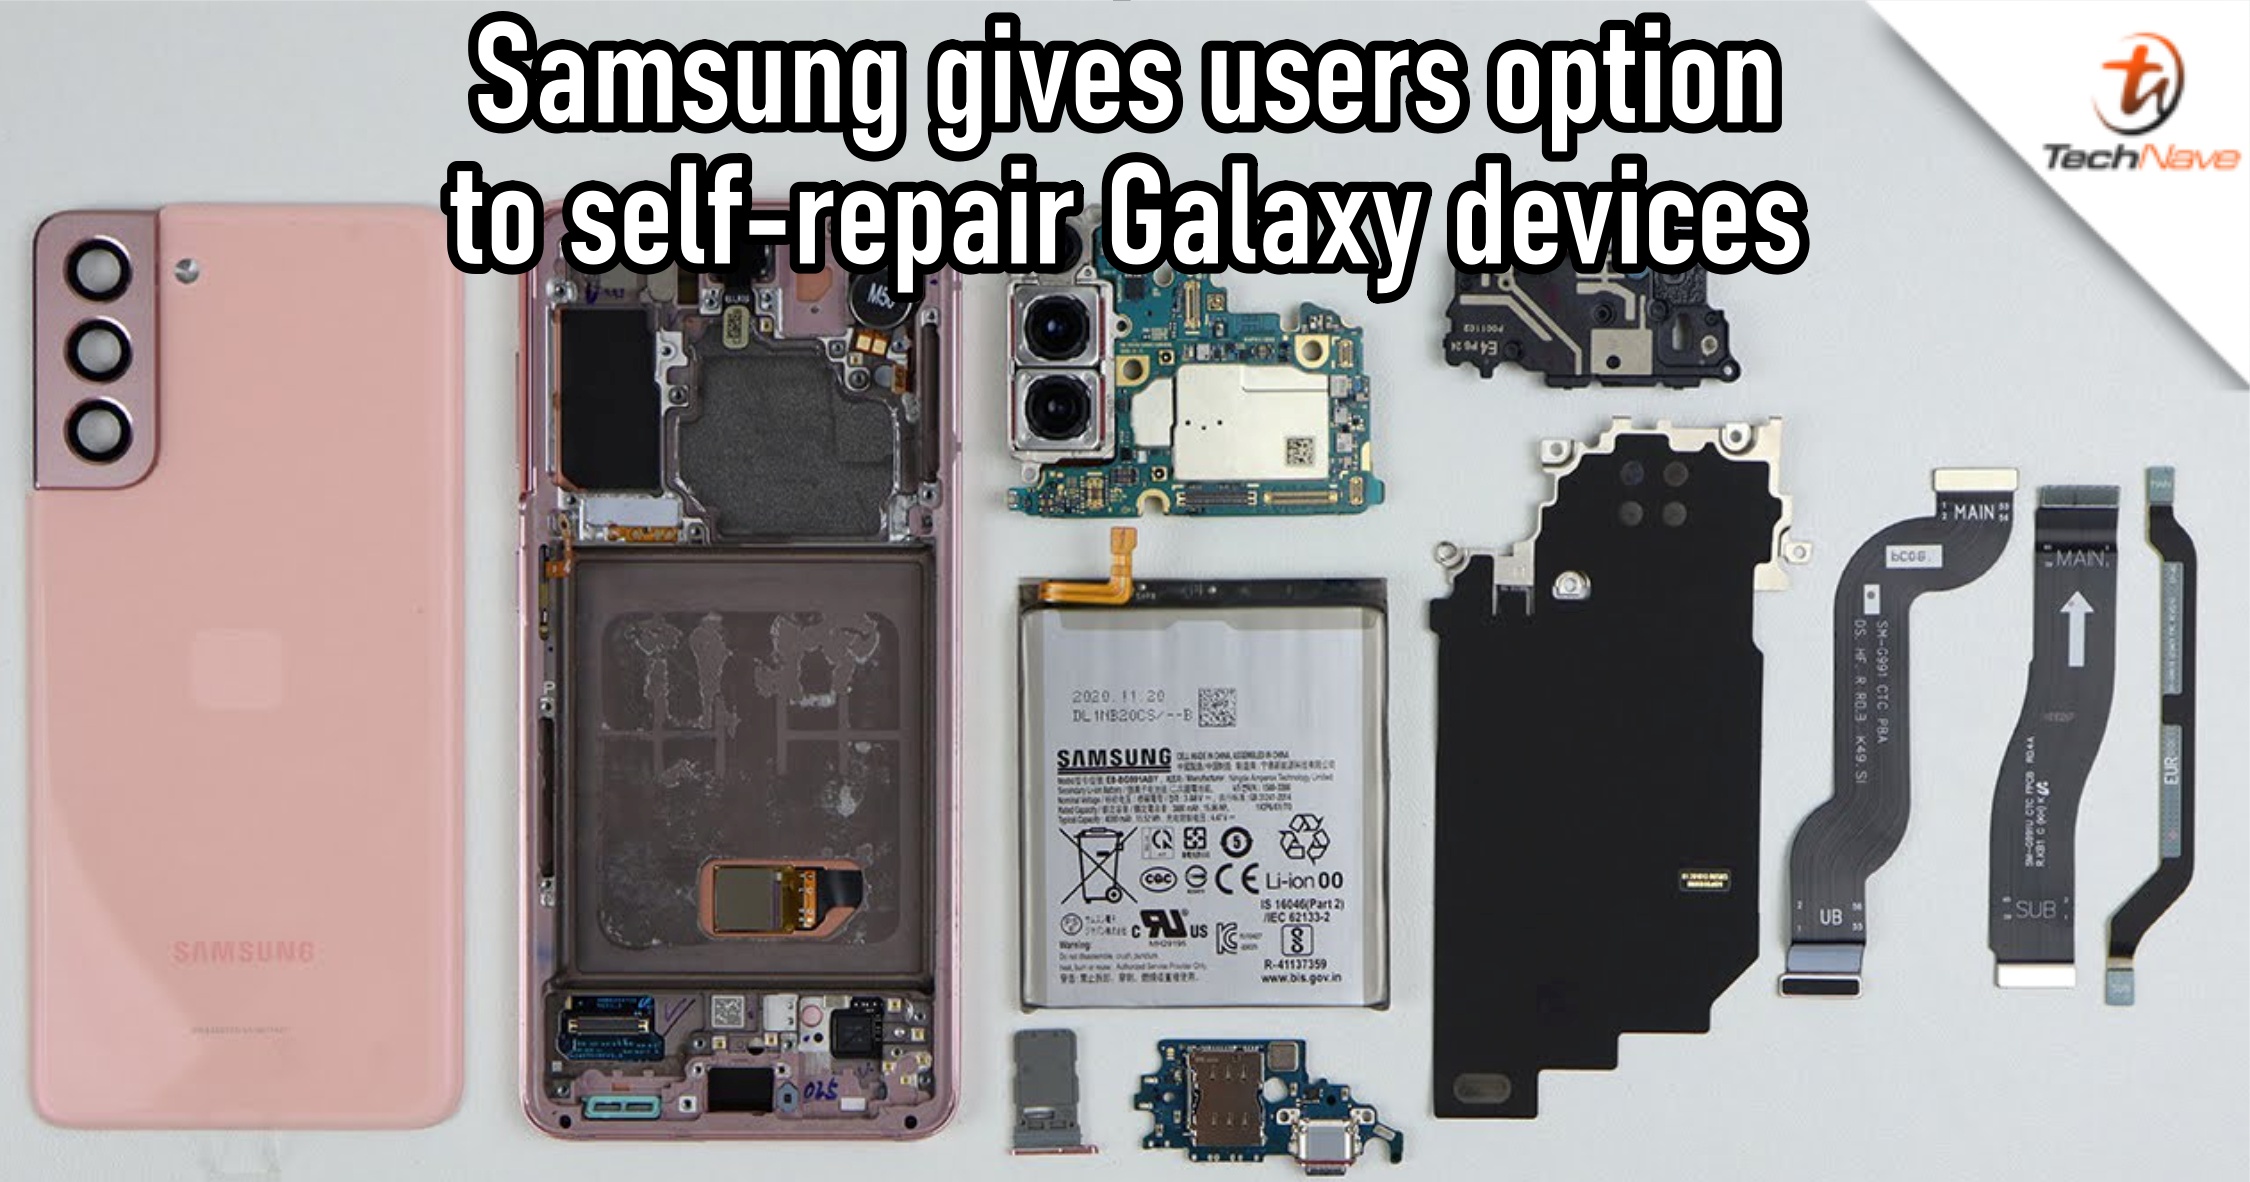 Samsung to allow Galaxy smartphone owners to legally repair their own devices soon